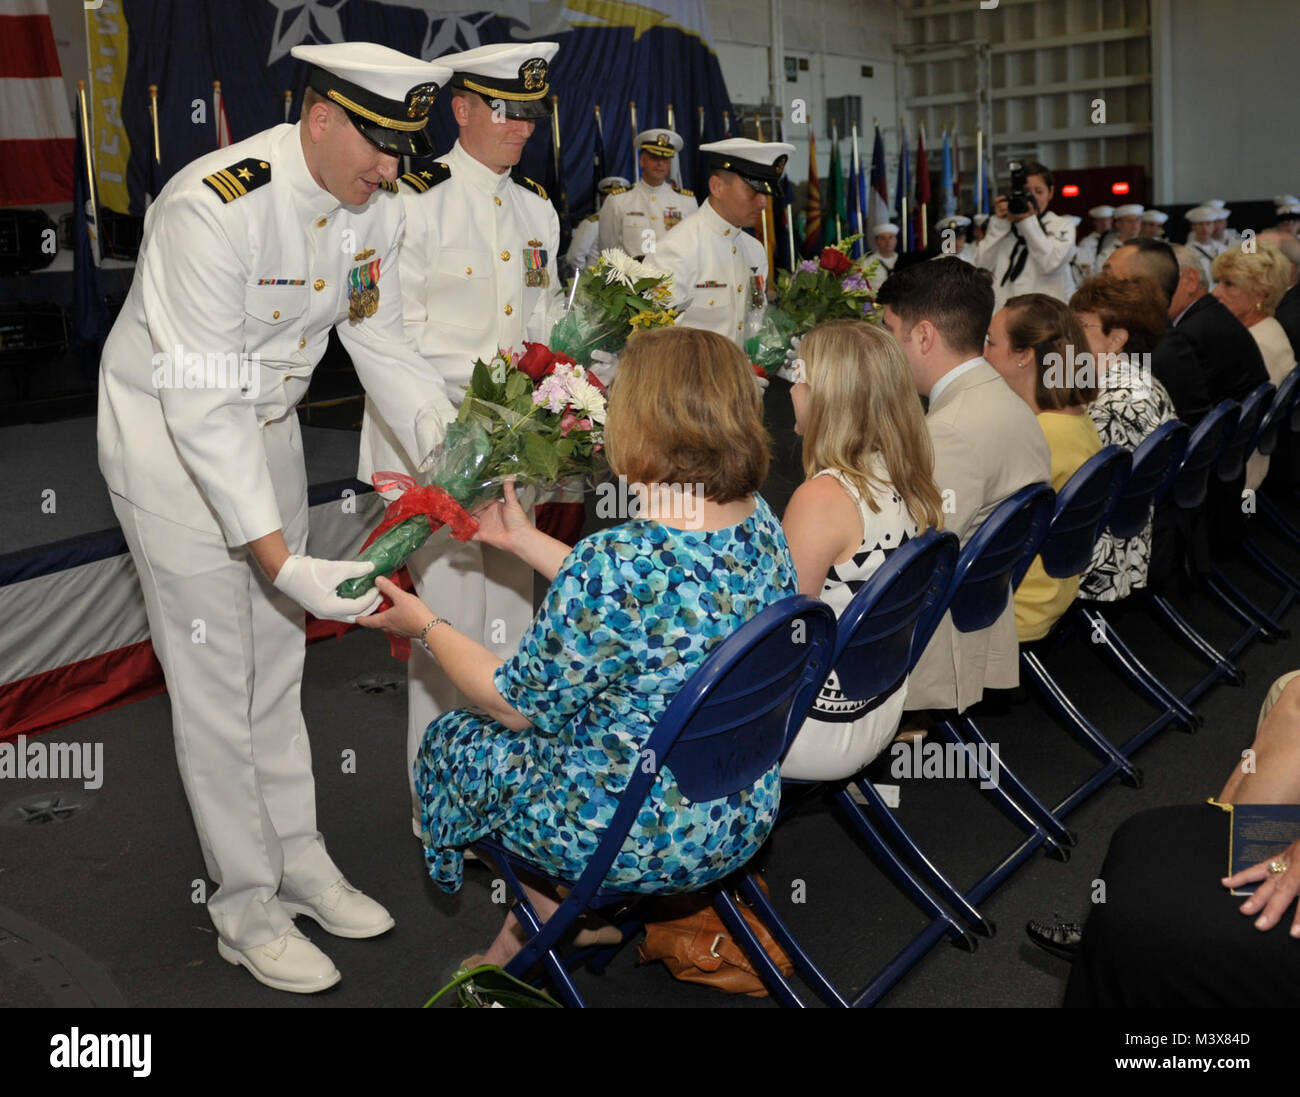 EVERETT, Wash. (July 8, 2014) Ceremonial ushers present the family of Rear Adm. Jeff Ruth with flowers during a change of command ceremony for the aircraft carrier USS Nimitz (CVN 68) held in the ship’s hangar bay. During the ceremony, Capt. John Ring assumed command of Nimitz from Ruth. (U.S. Navy photo by Mass Communication Specialist 3rd Class Aiyana S. Paschal/Released) 140708-N-WM477-091.jpg by USS NIMITZ (CVN 68) Stock Photo